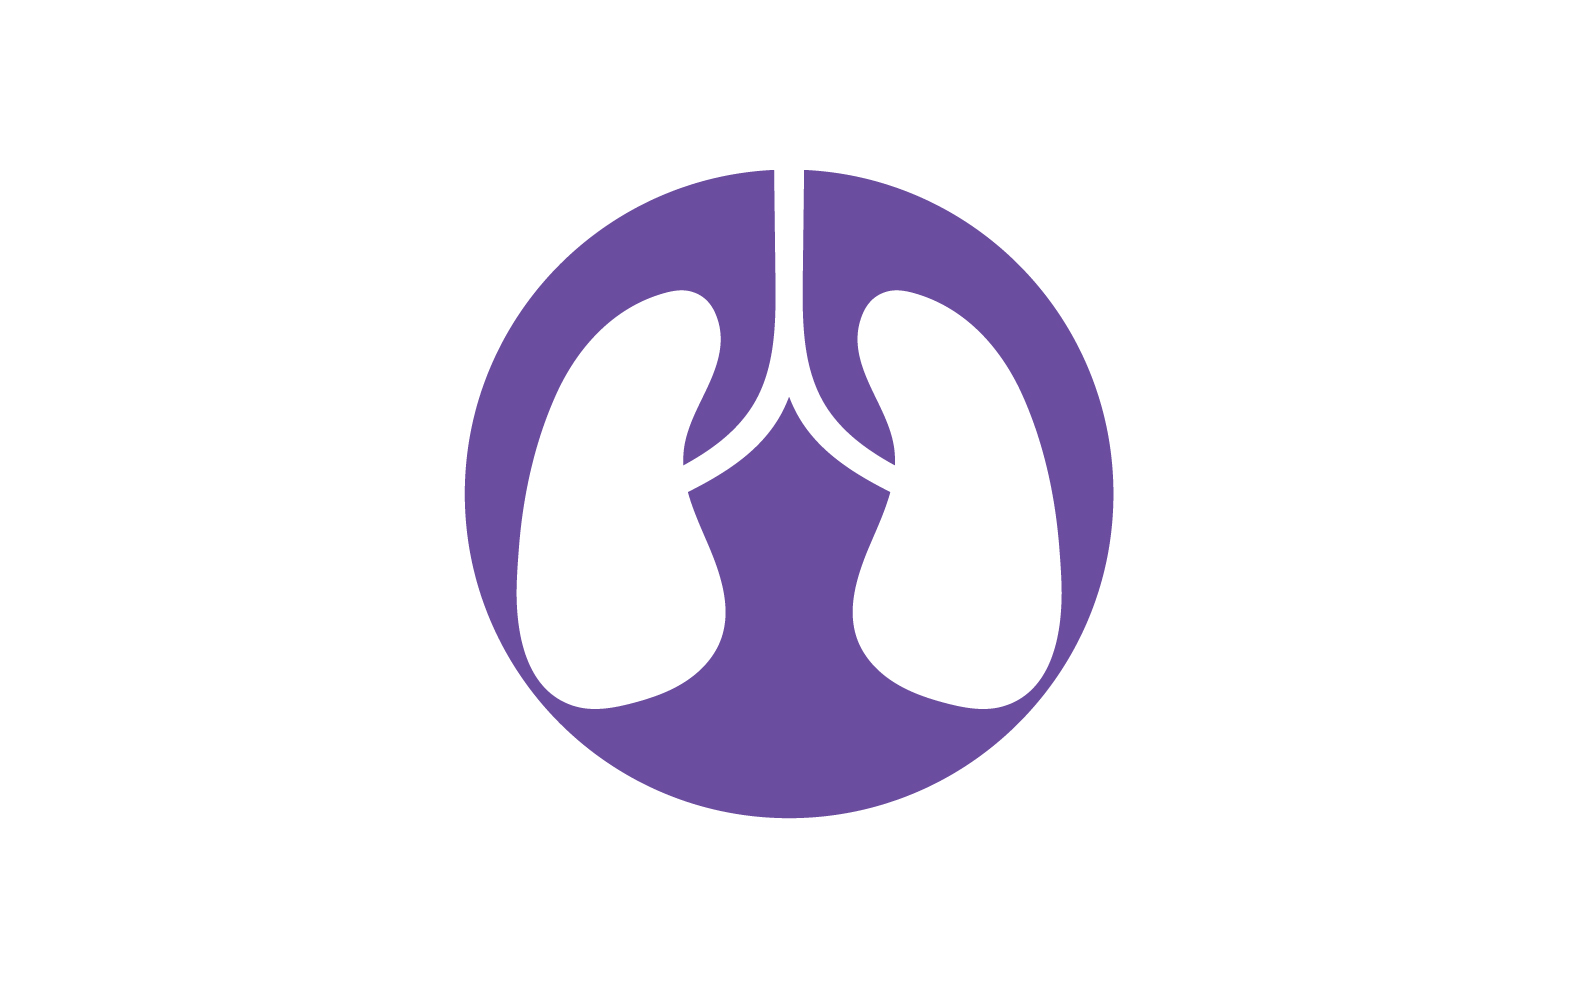 Health lungs logo and symbol vector v30